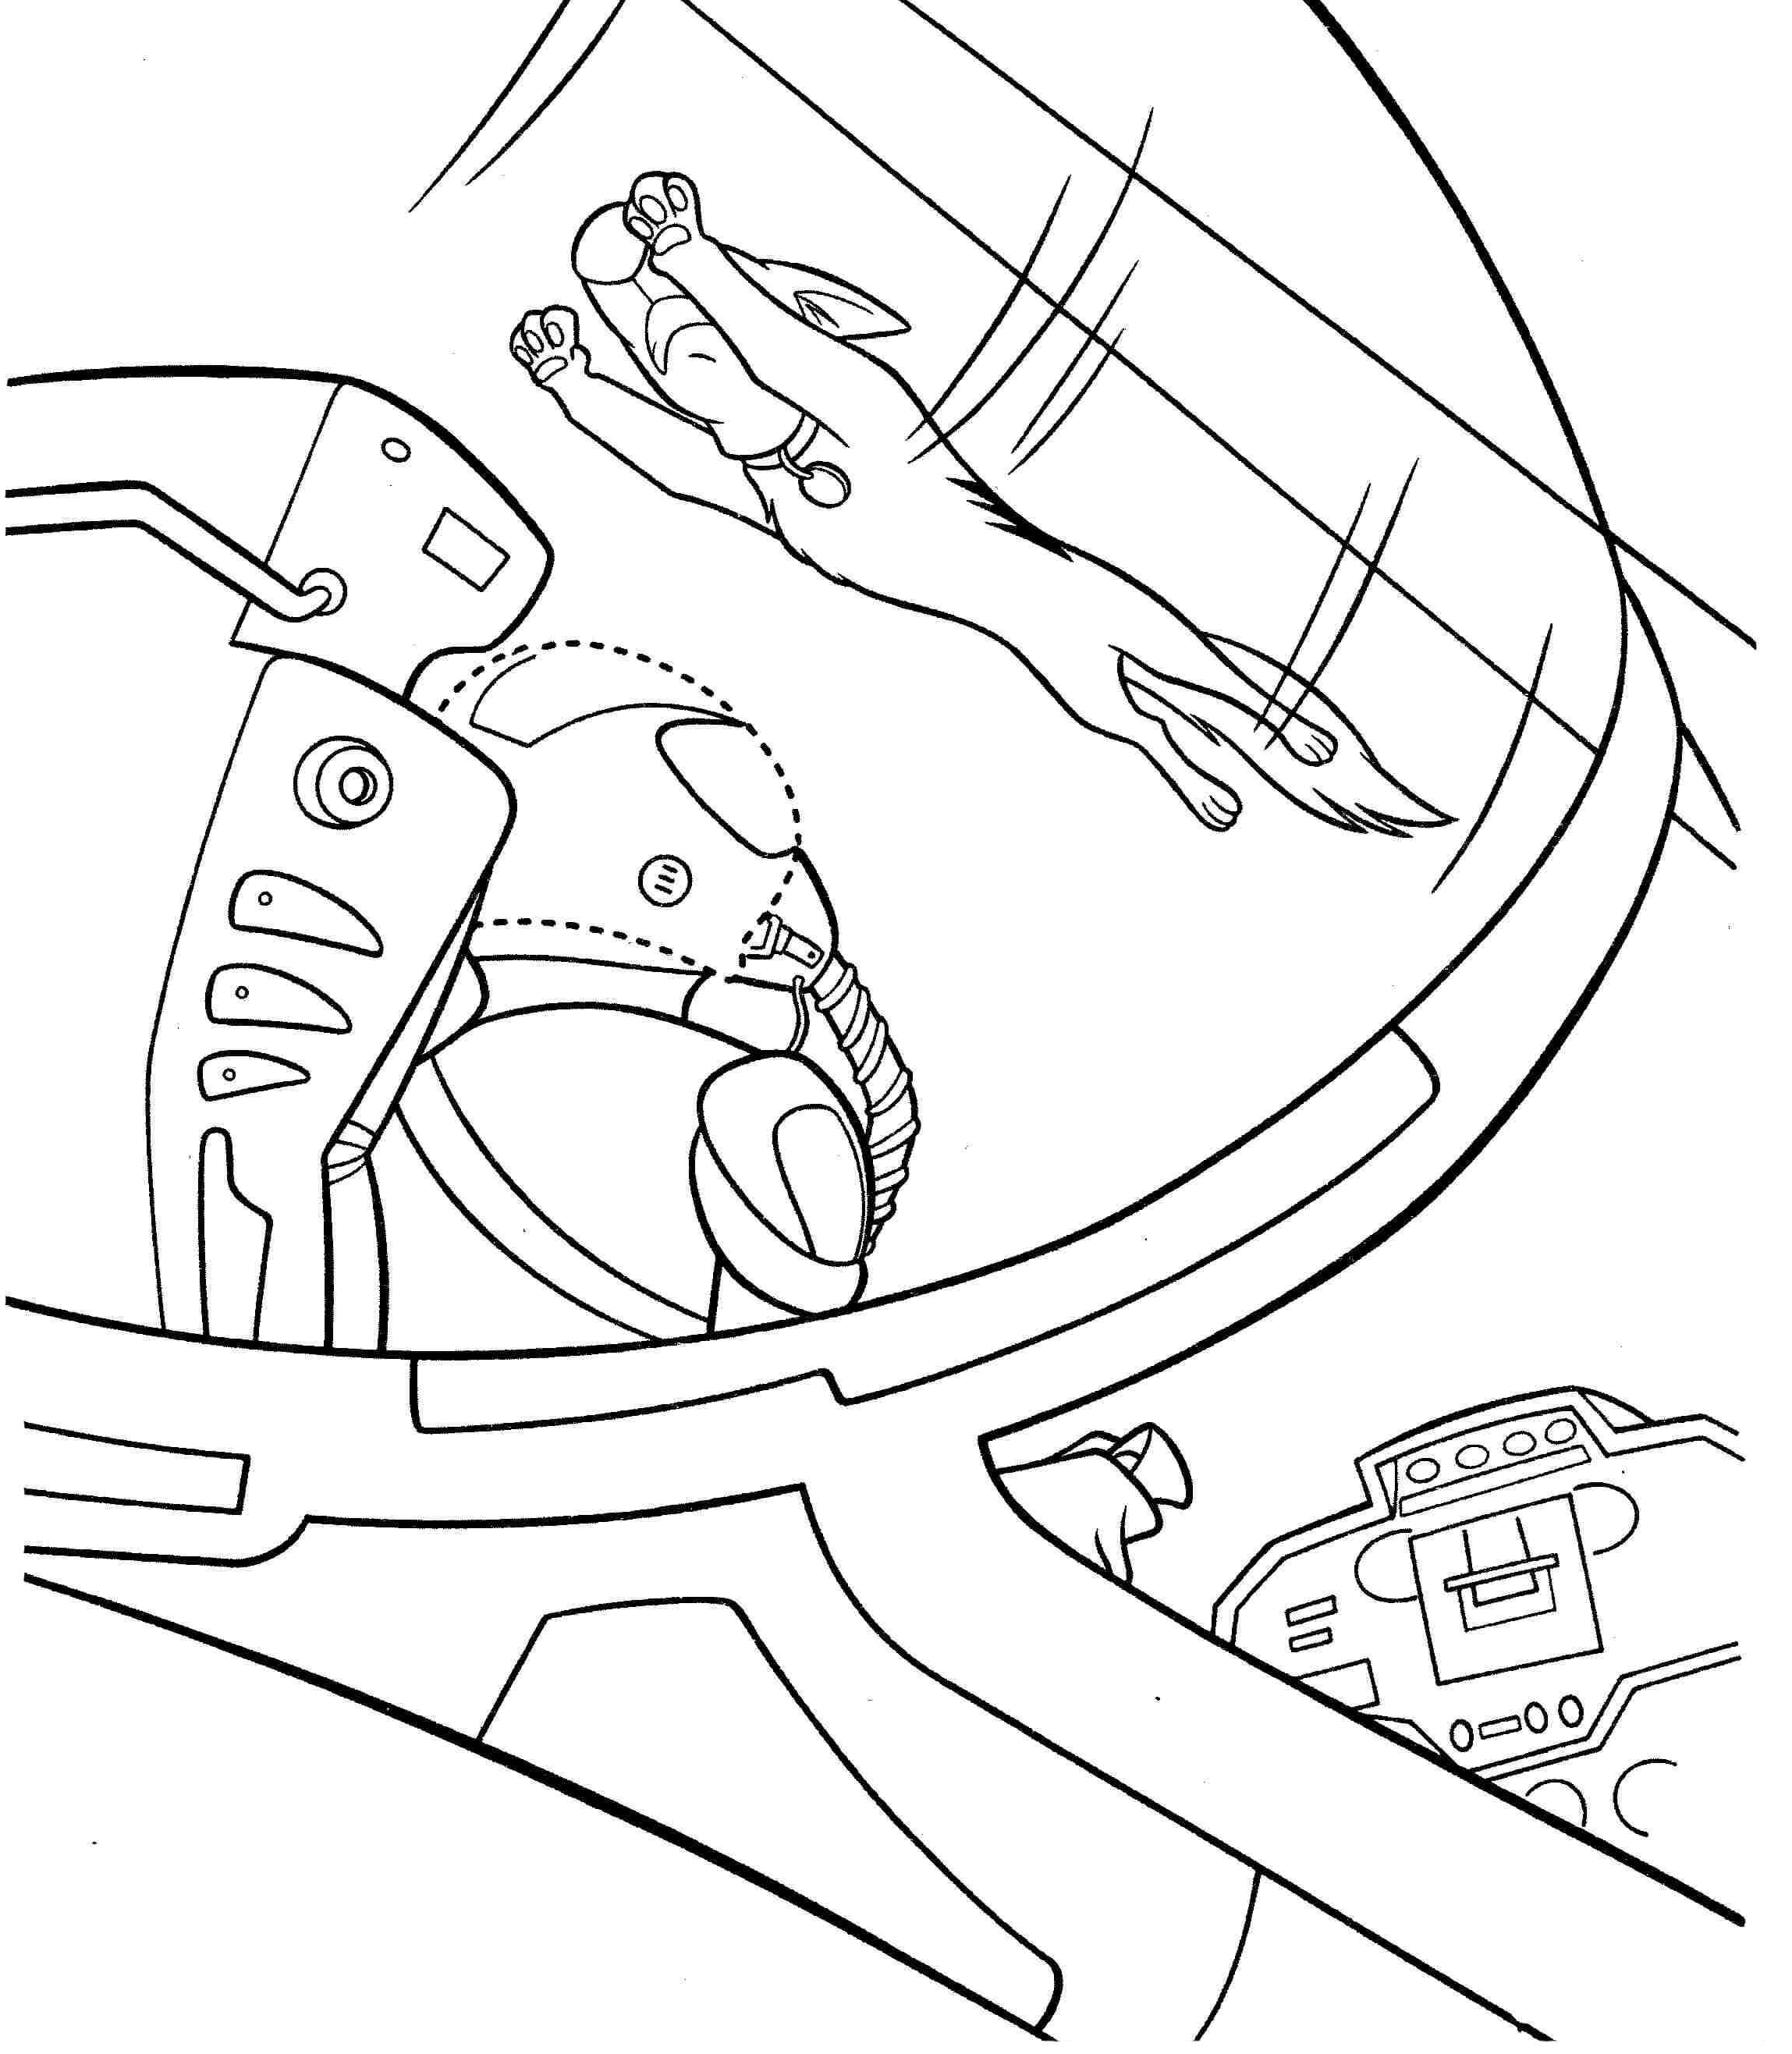 Bolt Is Jumping Super High Coloring Pages